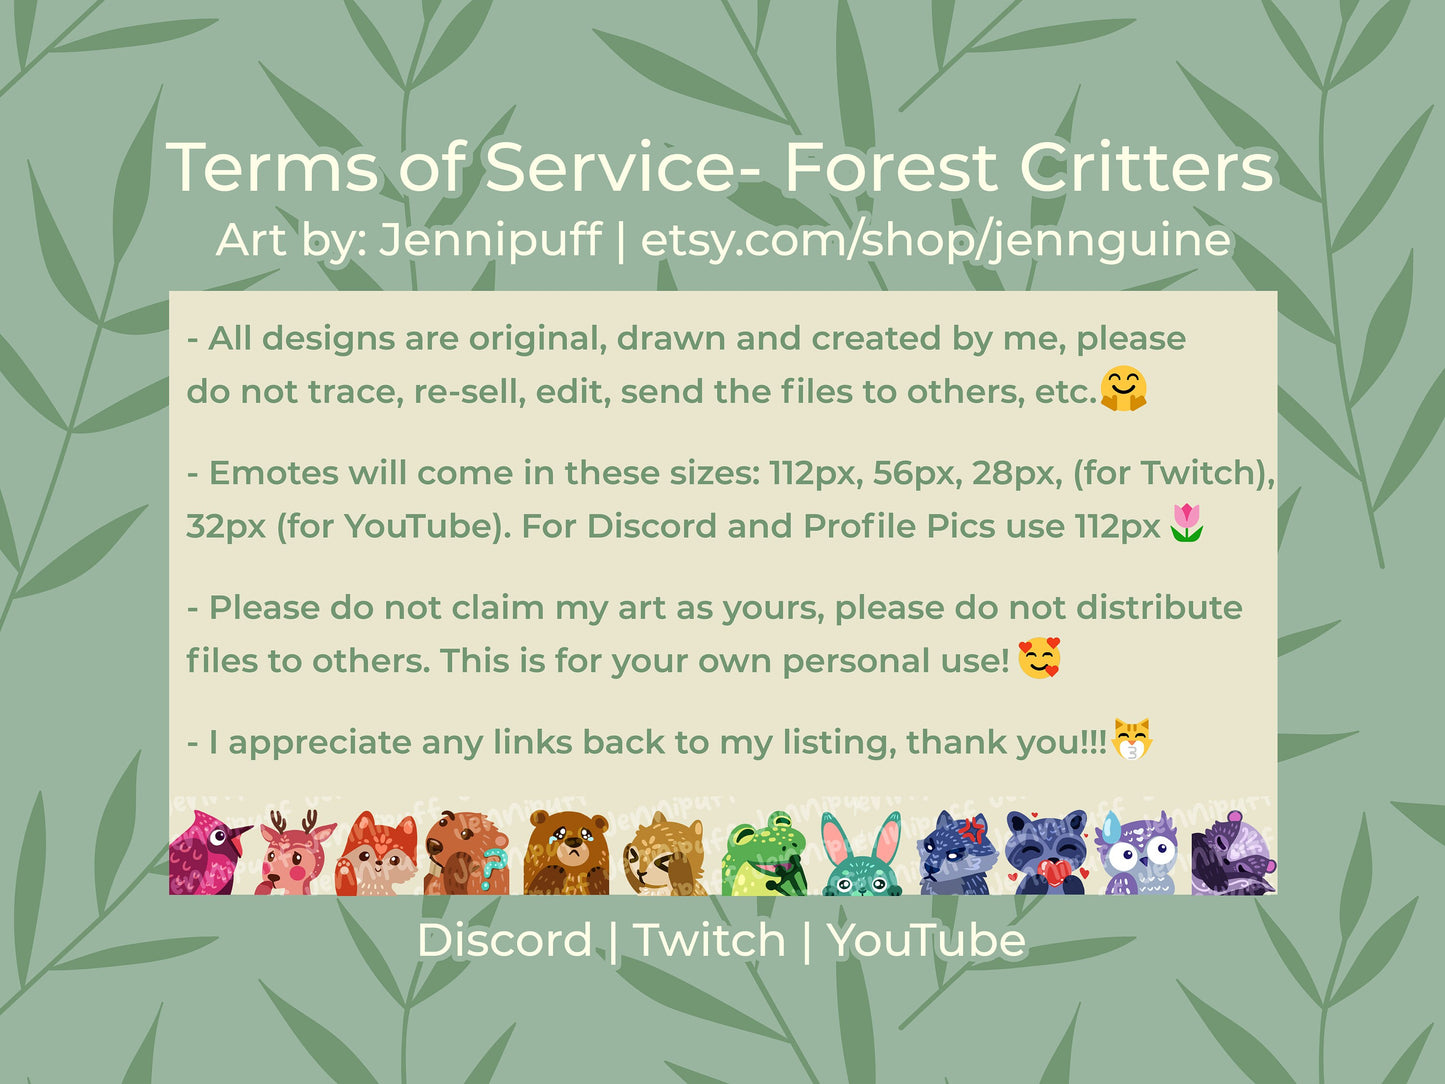 Unique Cool Art Style Emotes ~ Cute Kawaii Forest Animals, Pack of 12, Cottagecore Woodland Critters Emotes for Twitch, Discord, YouTube